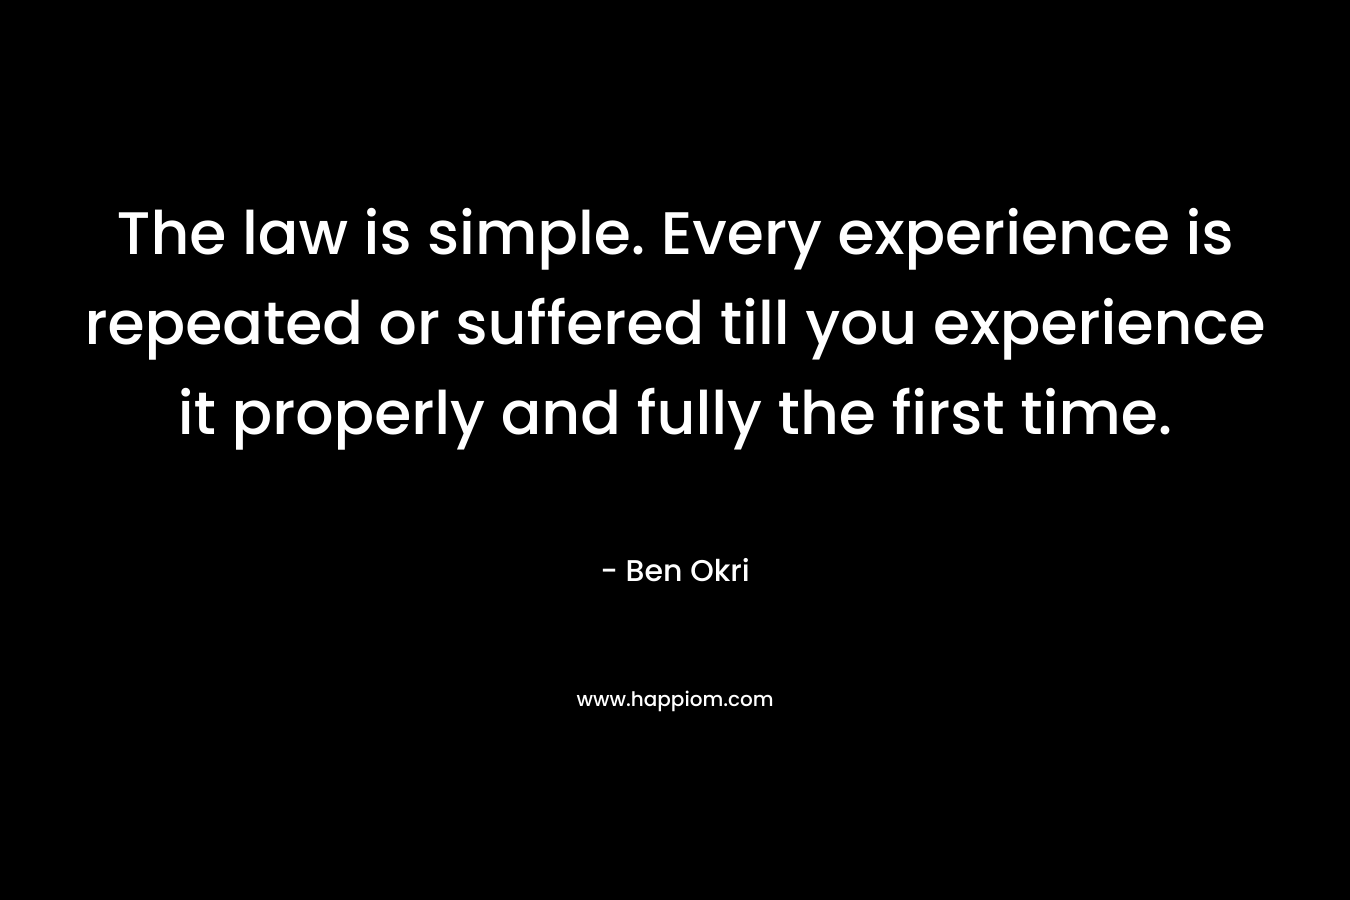 The law is simple. Every experience is repeated or suffered till you experience it properly and fully the first time. – Ben Okri